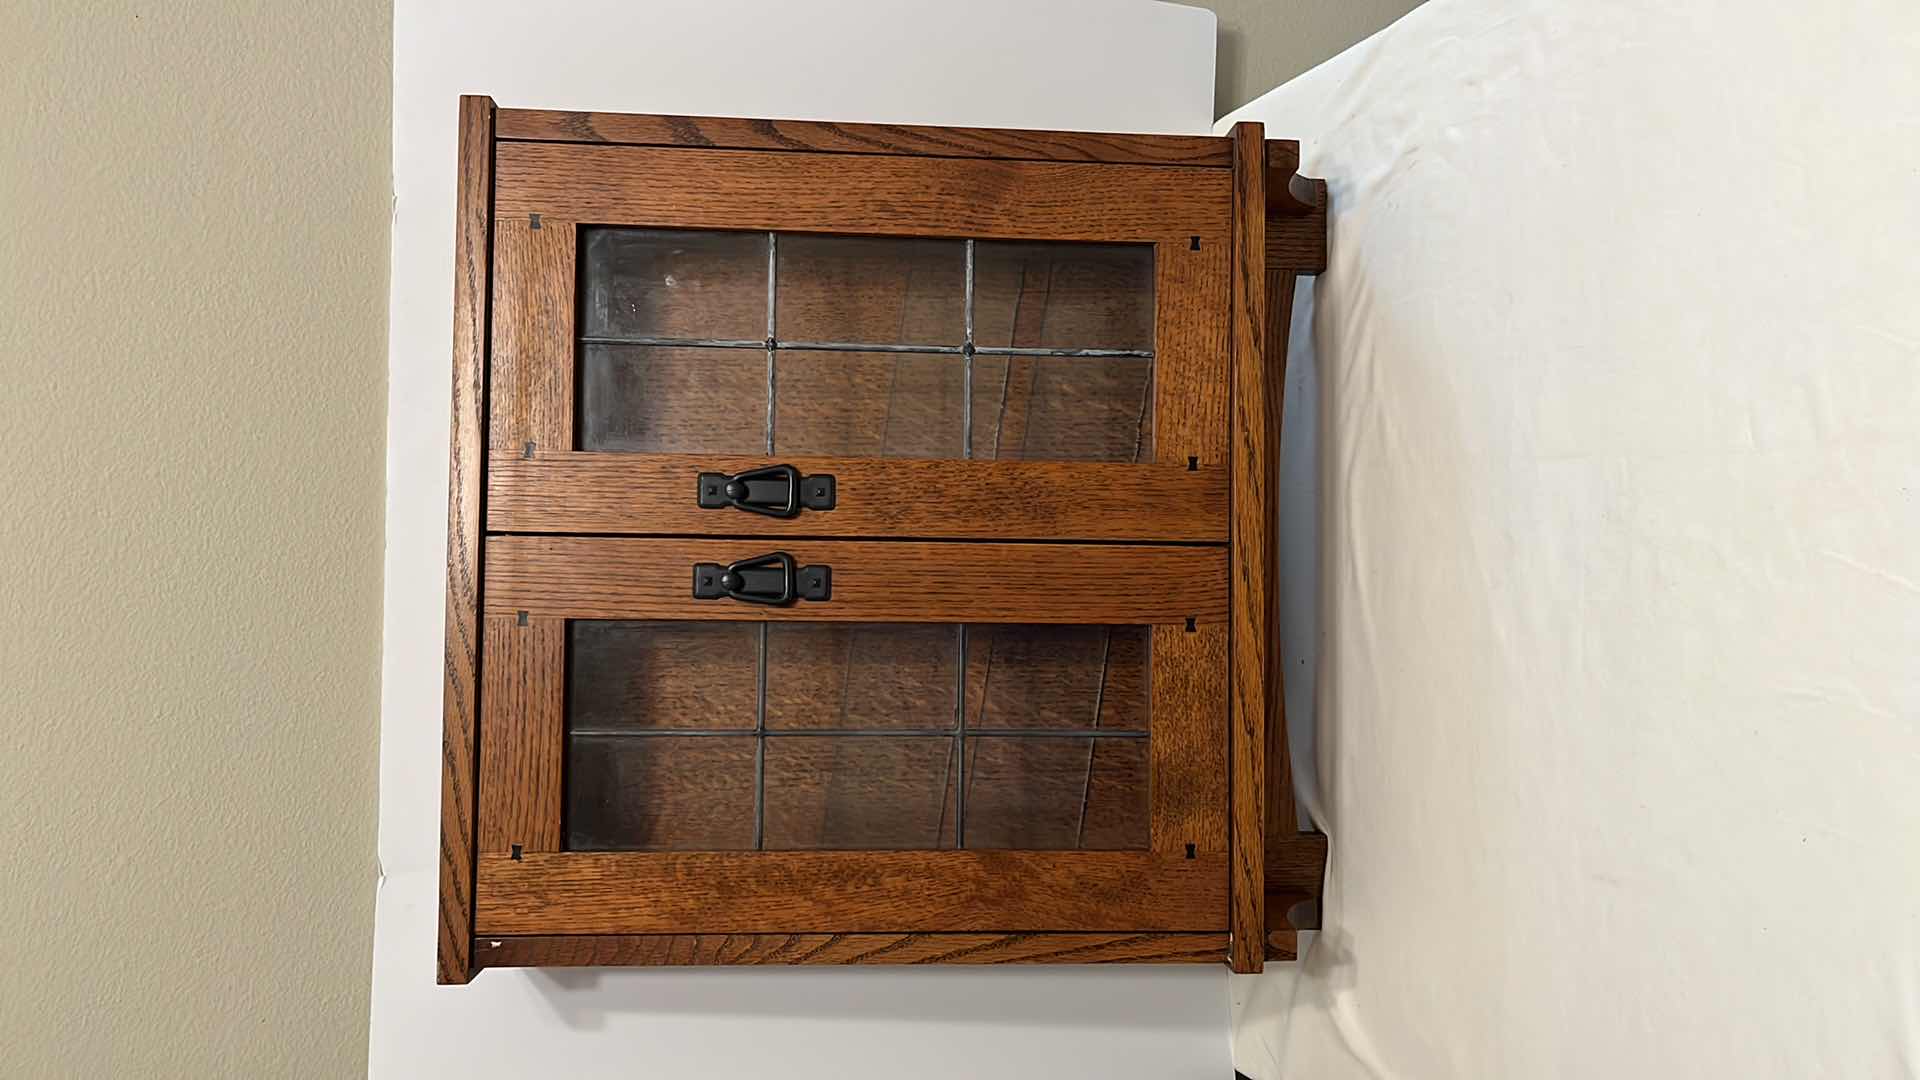 Photo 1 of MAHOGANY FINISH WOOD WALL CABINET W DISTORTED GLASS PANELS & GLASS SHELVES 5.5” X 23.5” H26”